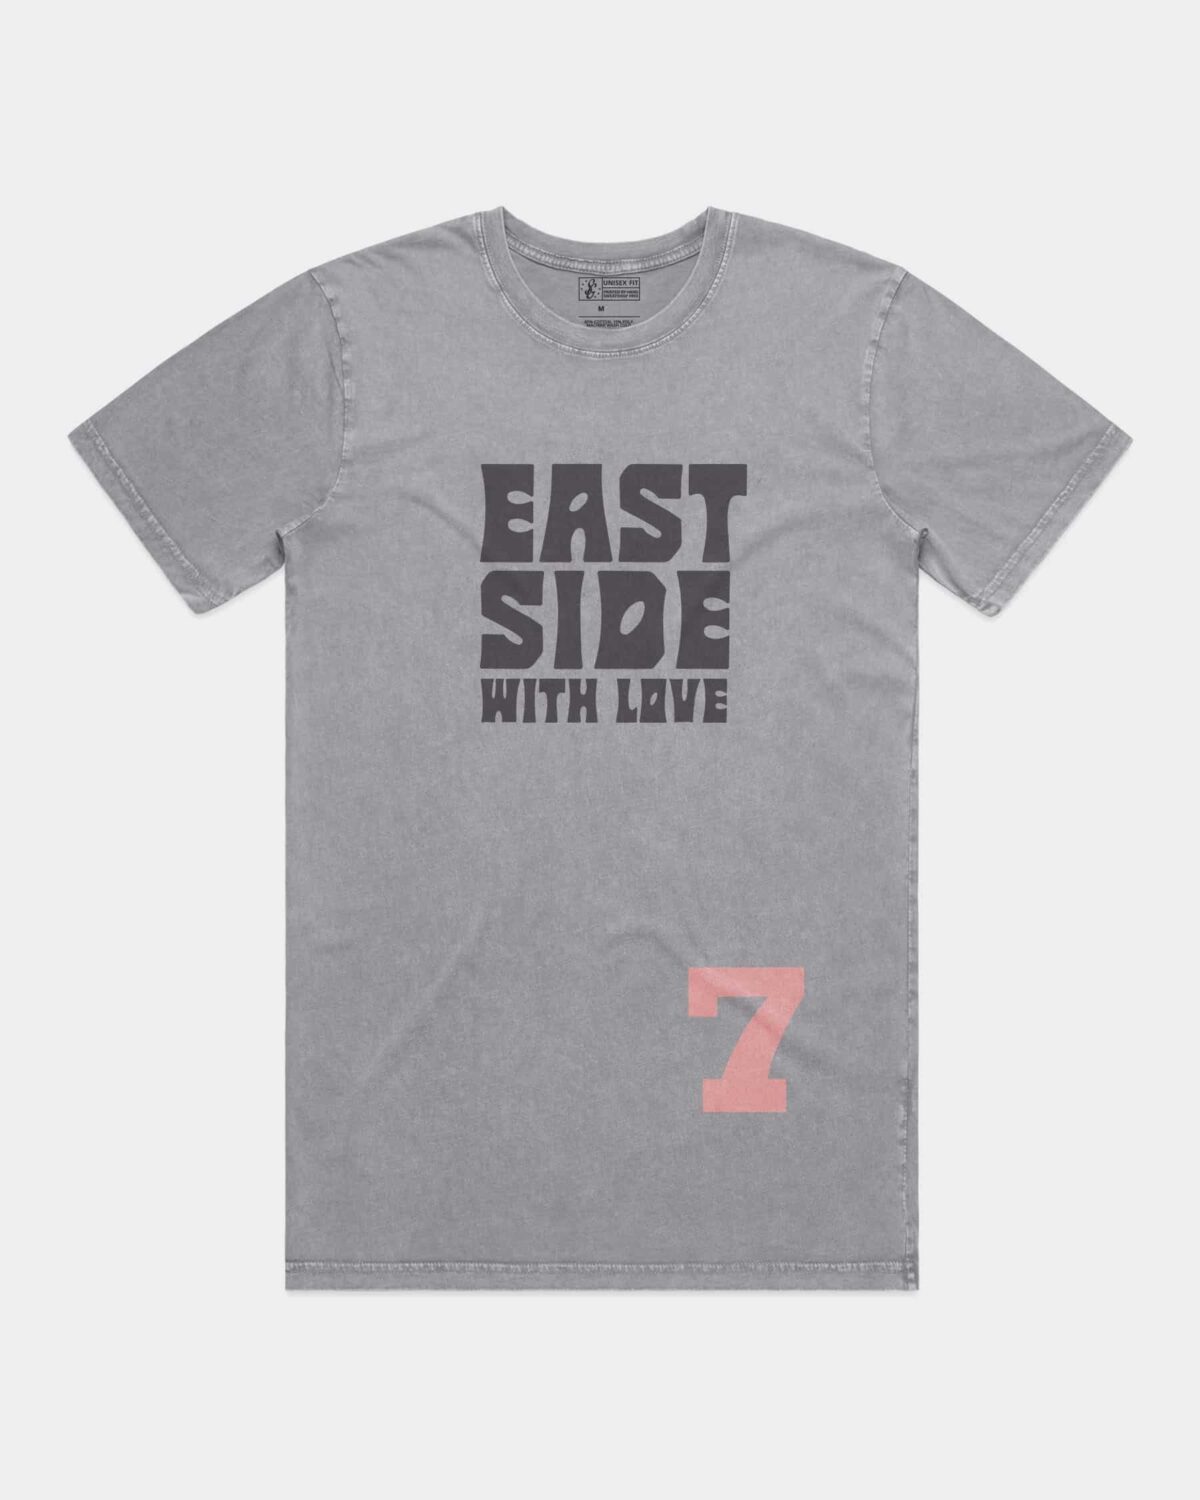 Hand printed custom tee for Jabee's East Side collection.